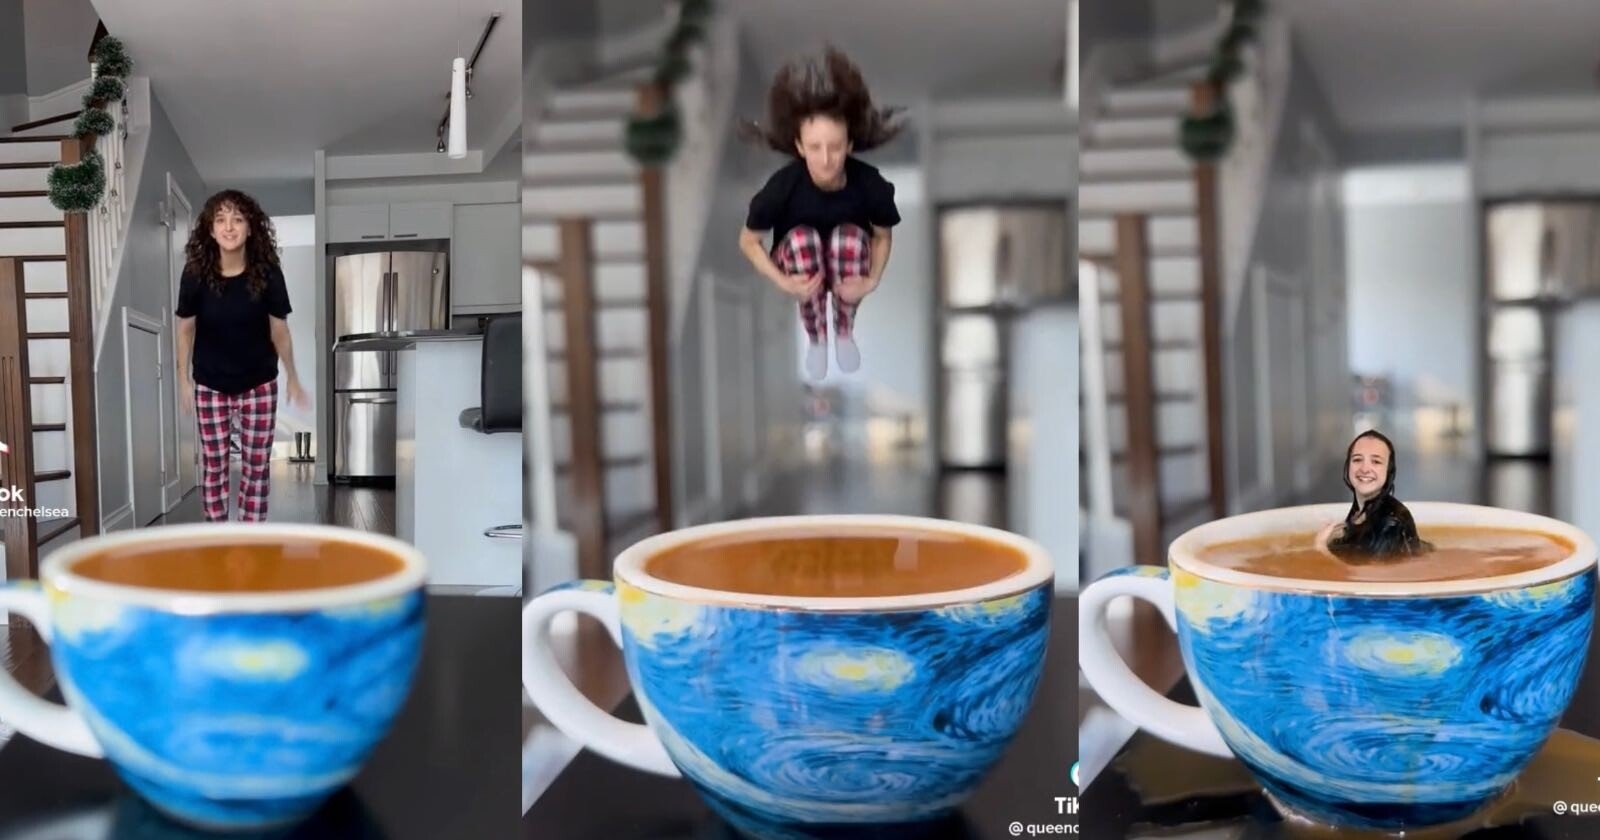 Artist Jumps into Her Morning Coffee in Mind-Bending Video